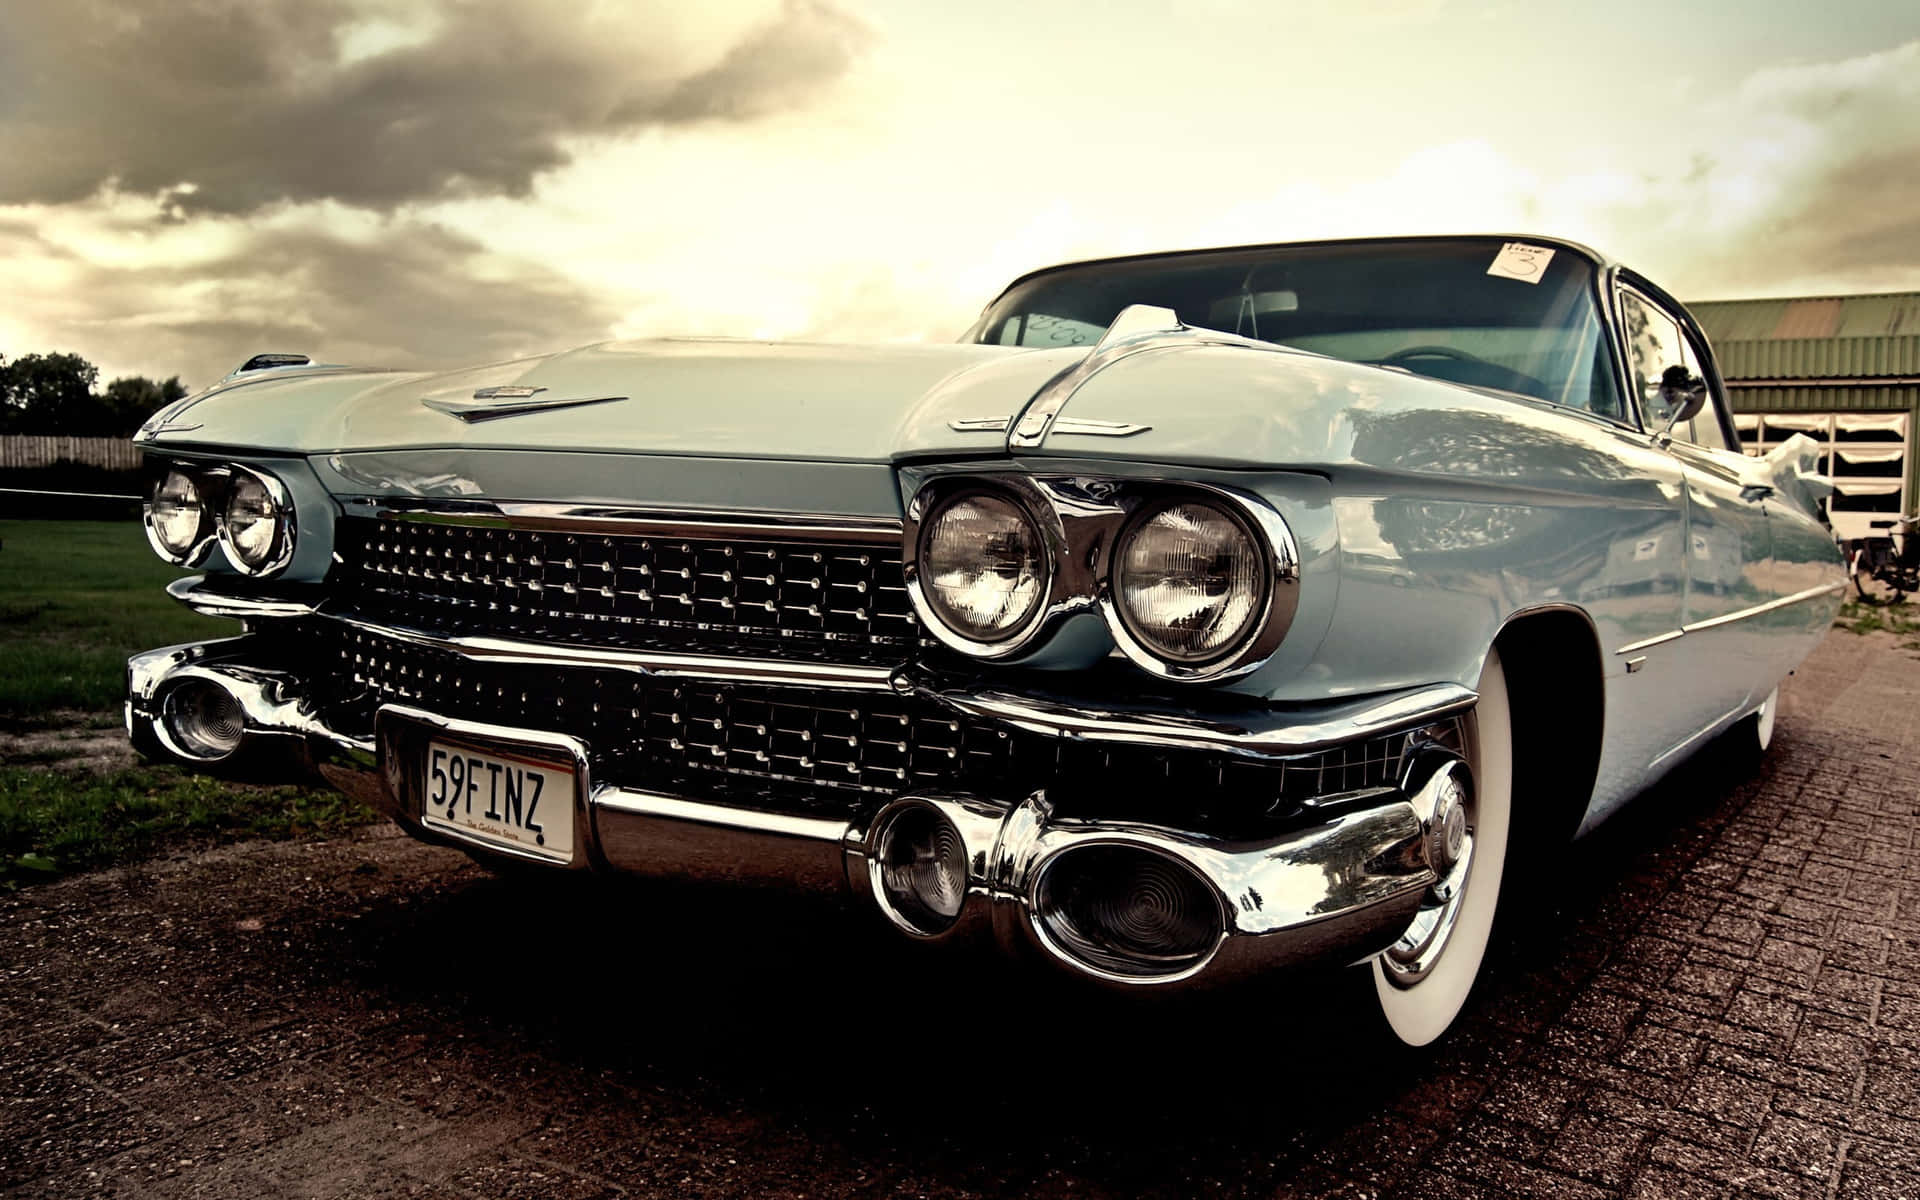 Immaculate Cadillac Deville on a Scenic Road Wallpaper